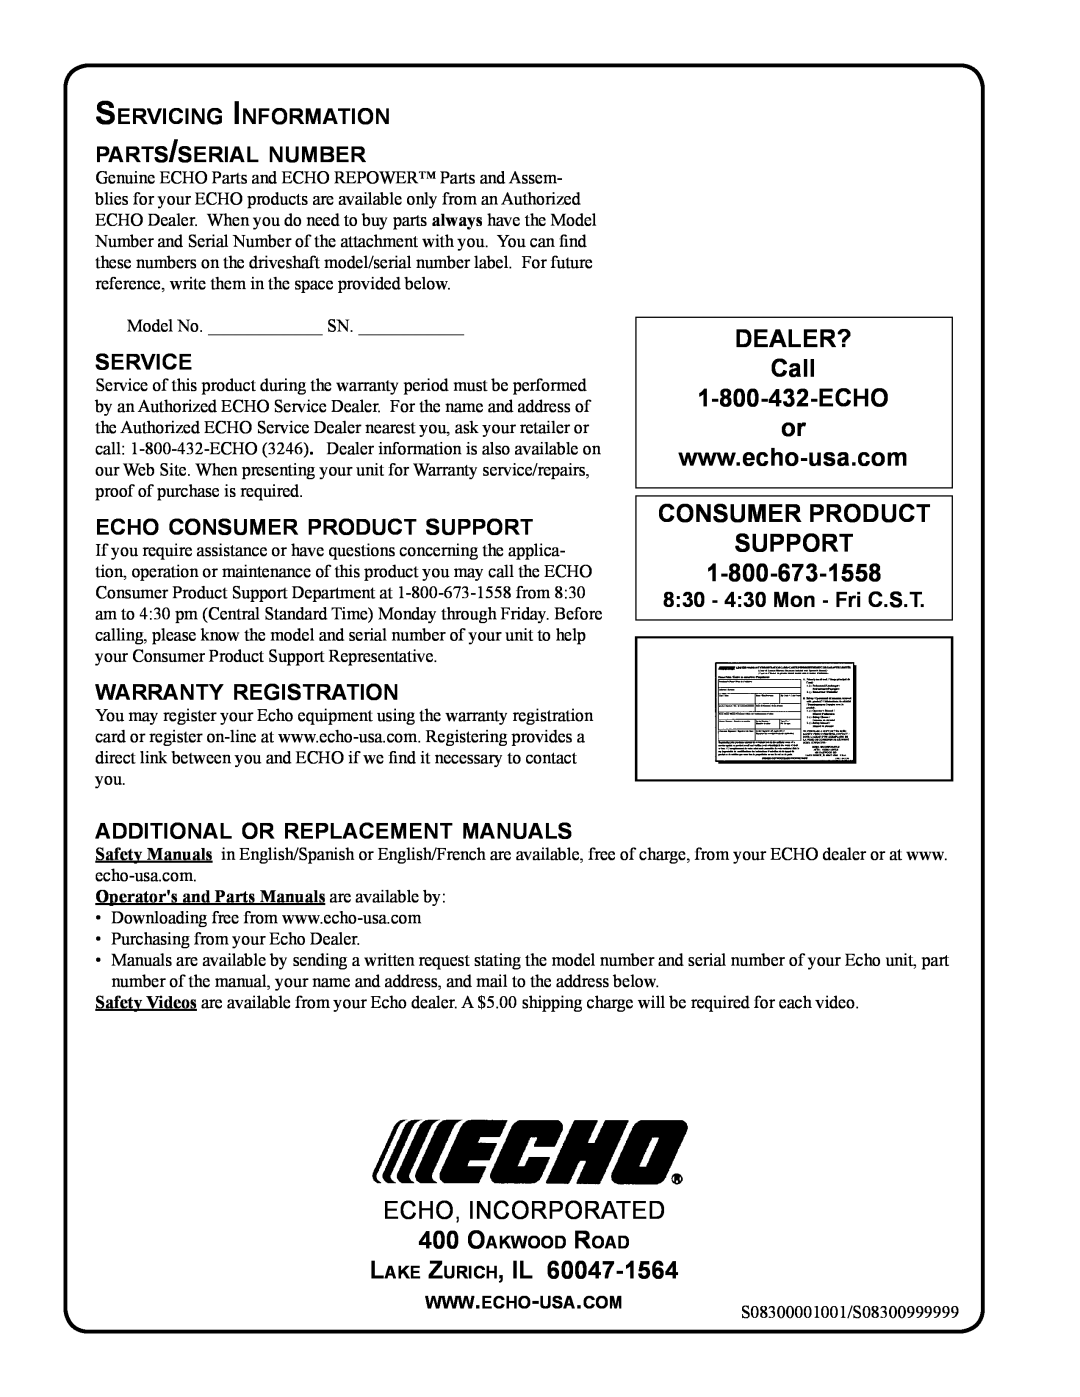 Echo 99944200563 manual Lake Zurich, IL, Servicing Information parts/serial number, service, echo consumer product support 